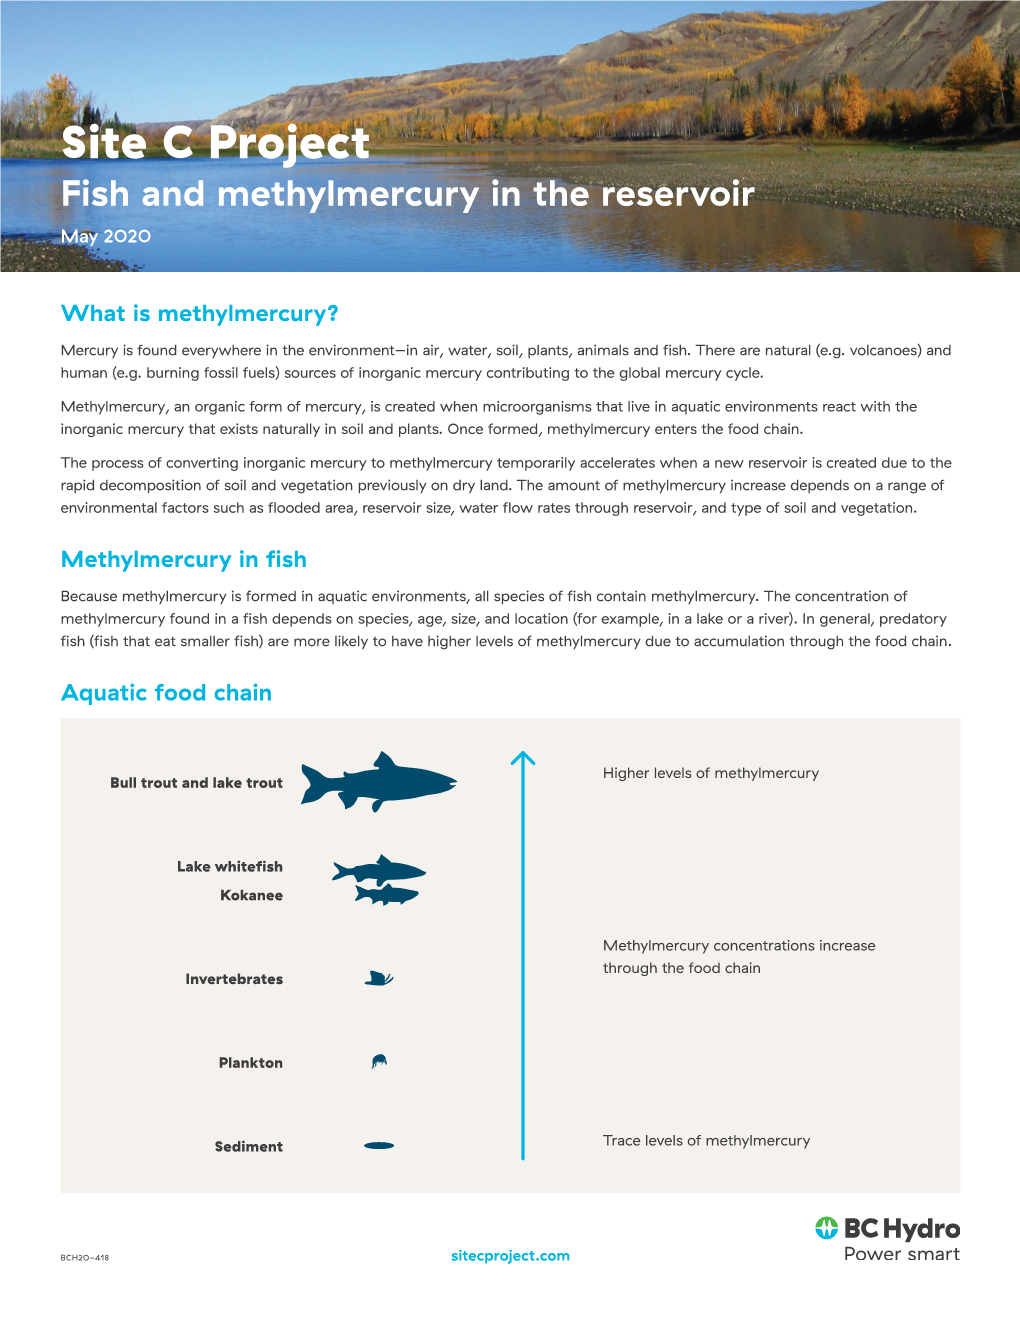 Learn More About Methylmercury in Fish